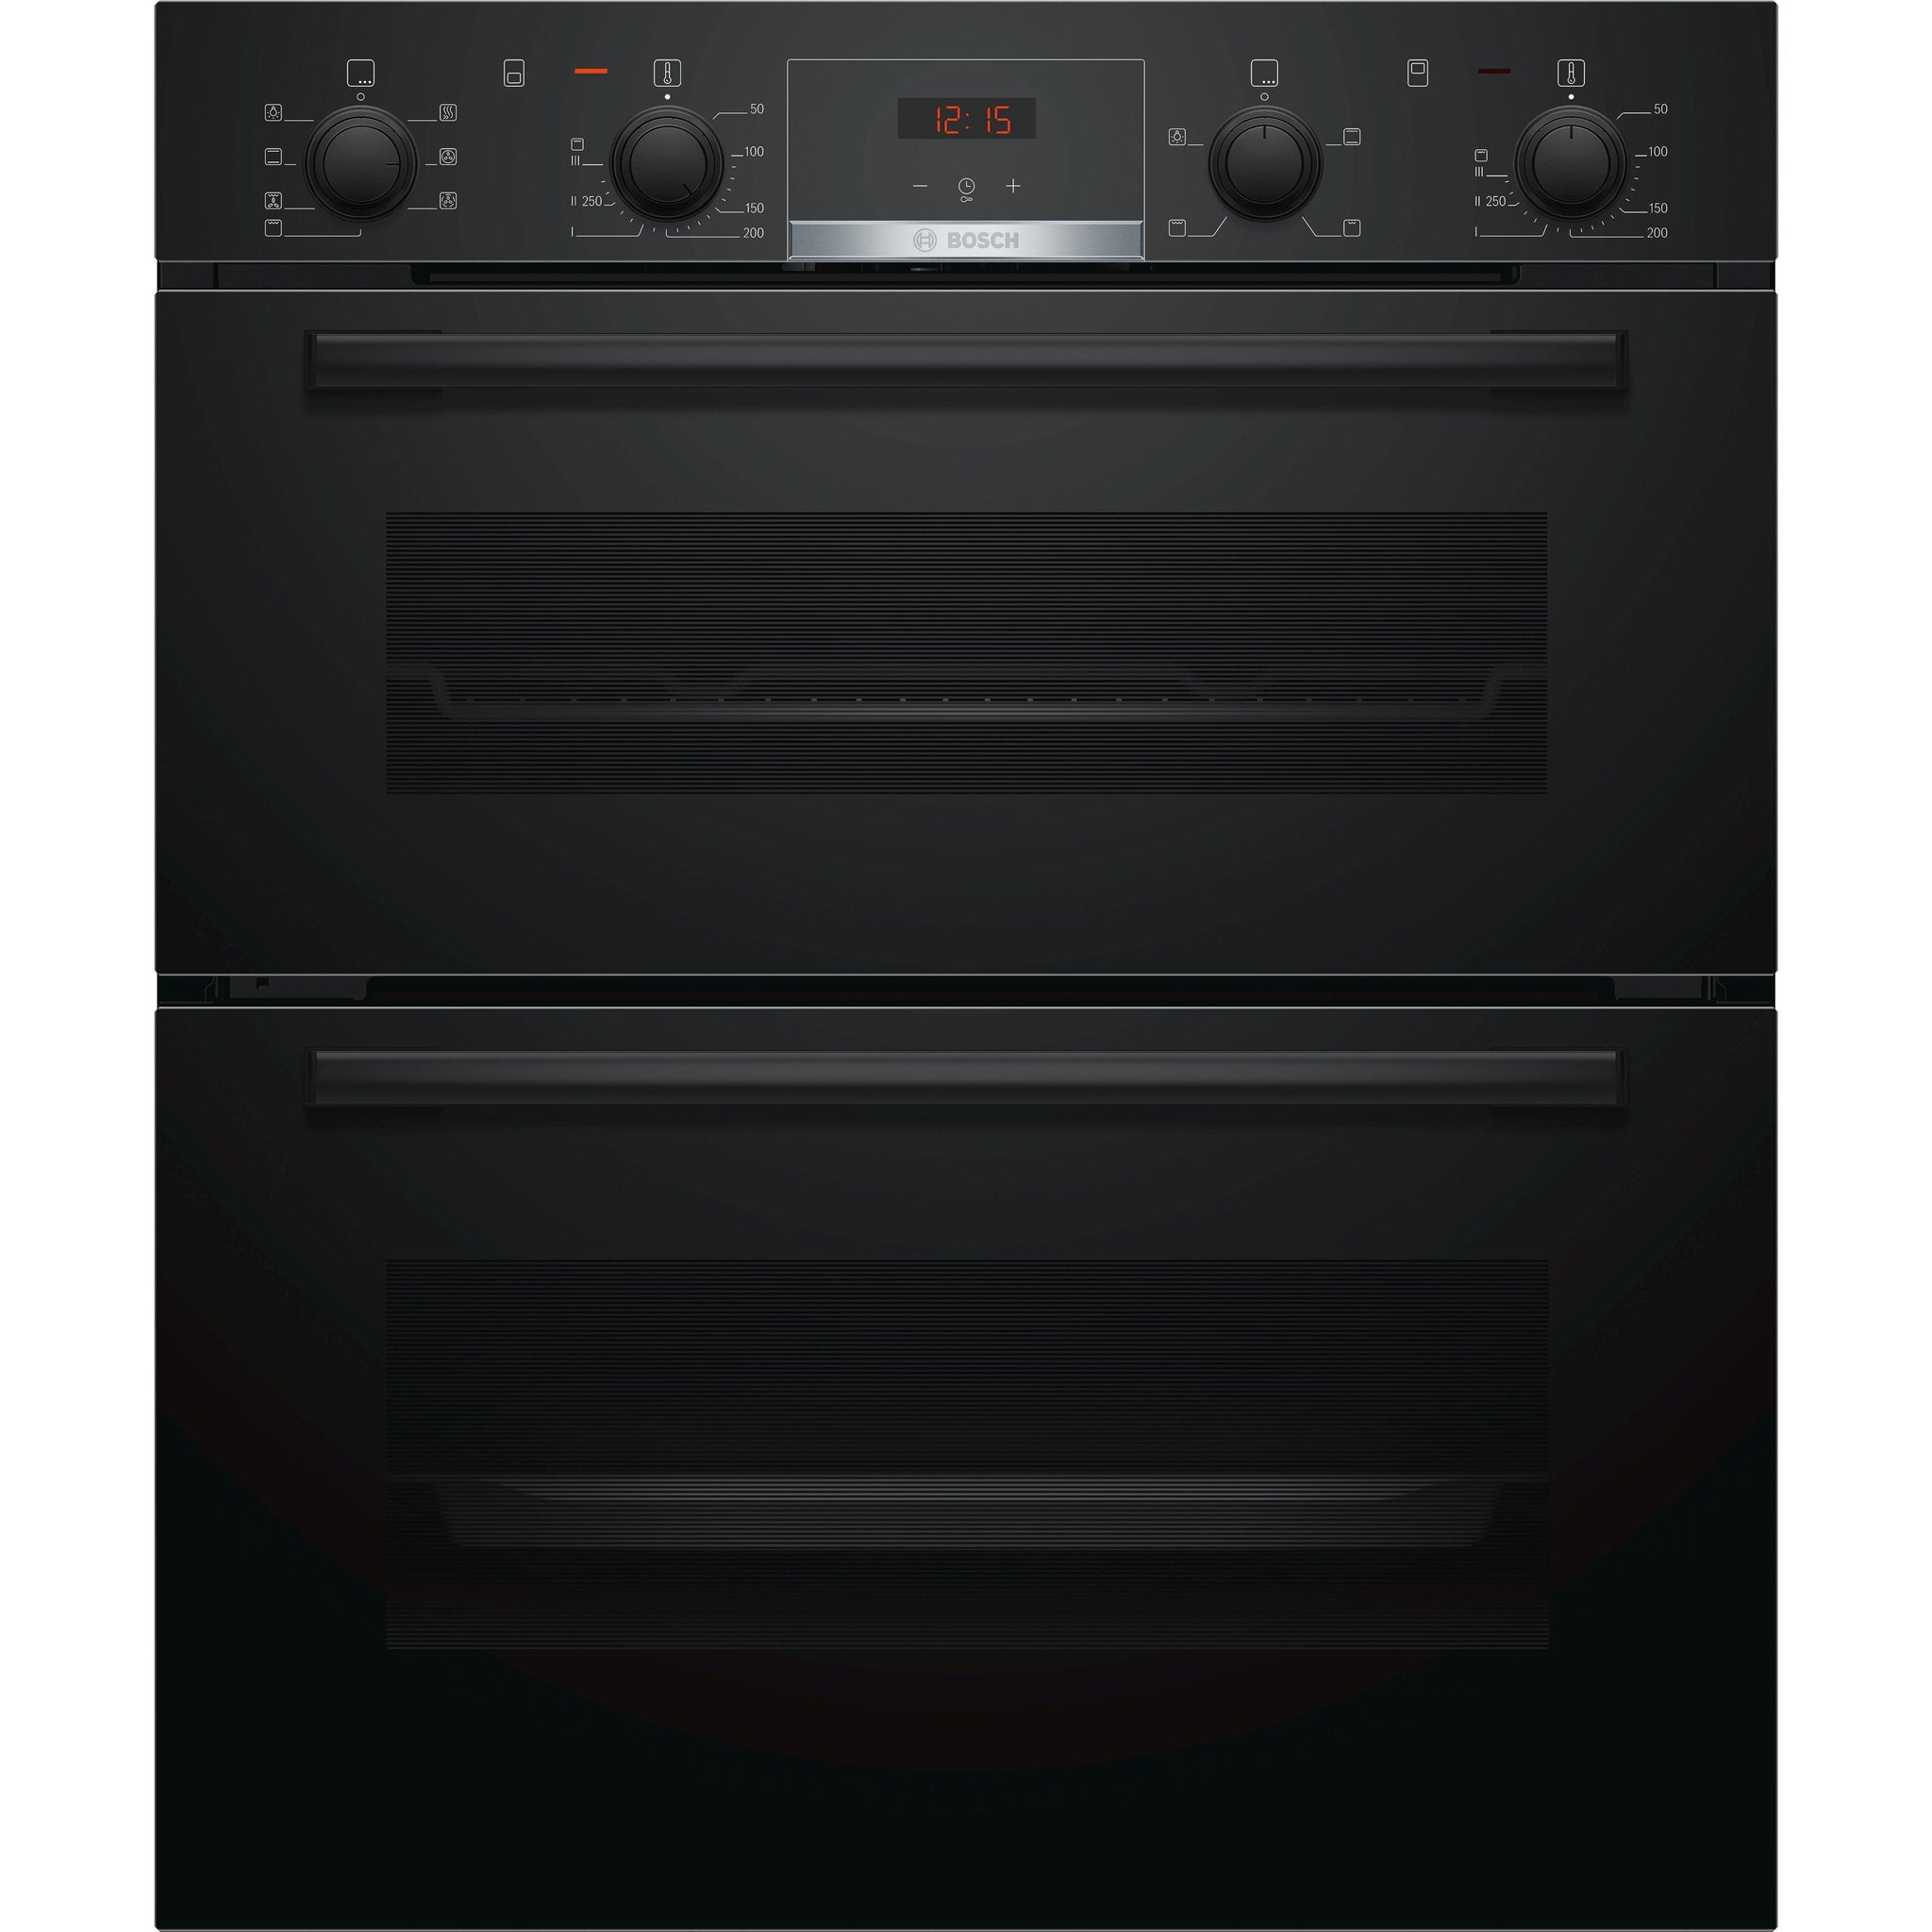 Bosch Series 4 Nbs533bb0b Builtunder Double Oven Black Delivery Within 710 Days